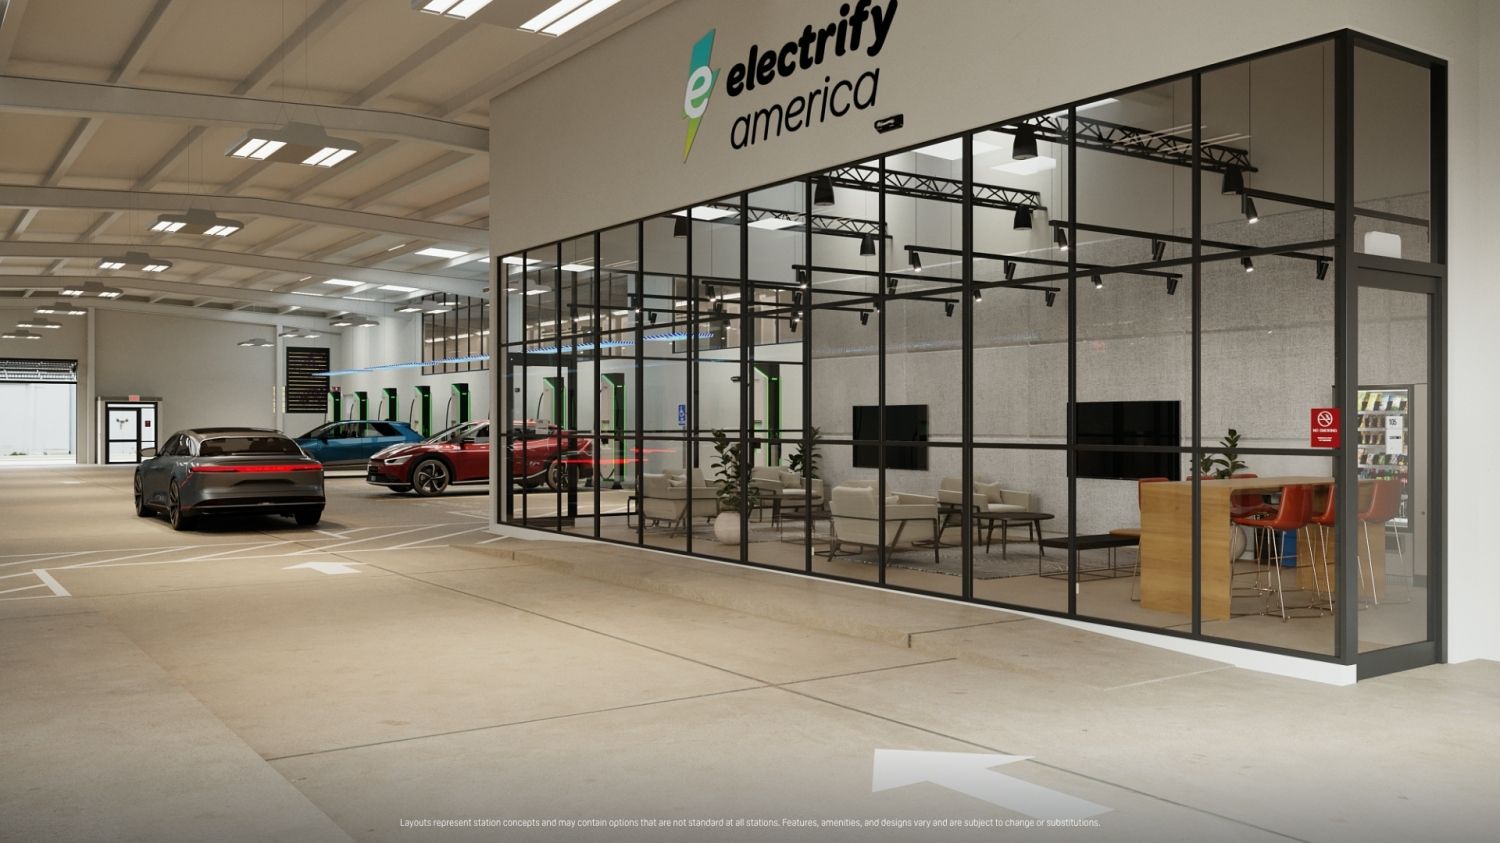 electrify america customer service lounge with lighting additional fast chargers and valet